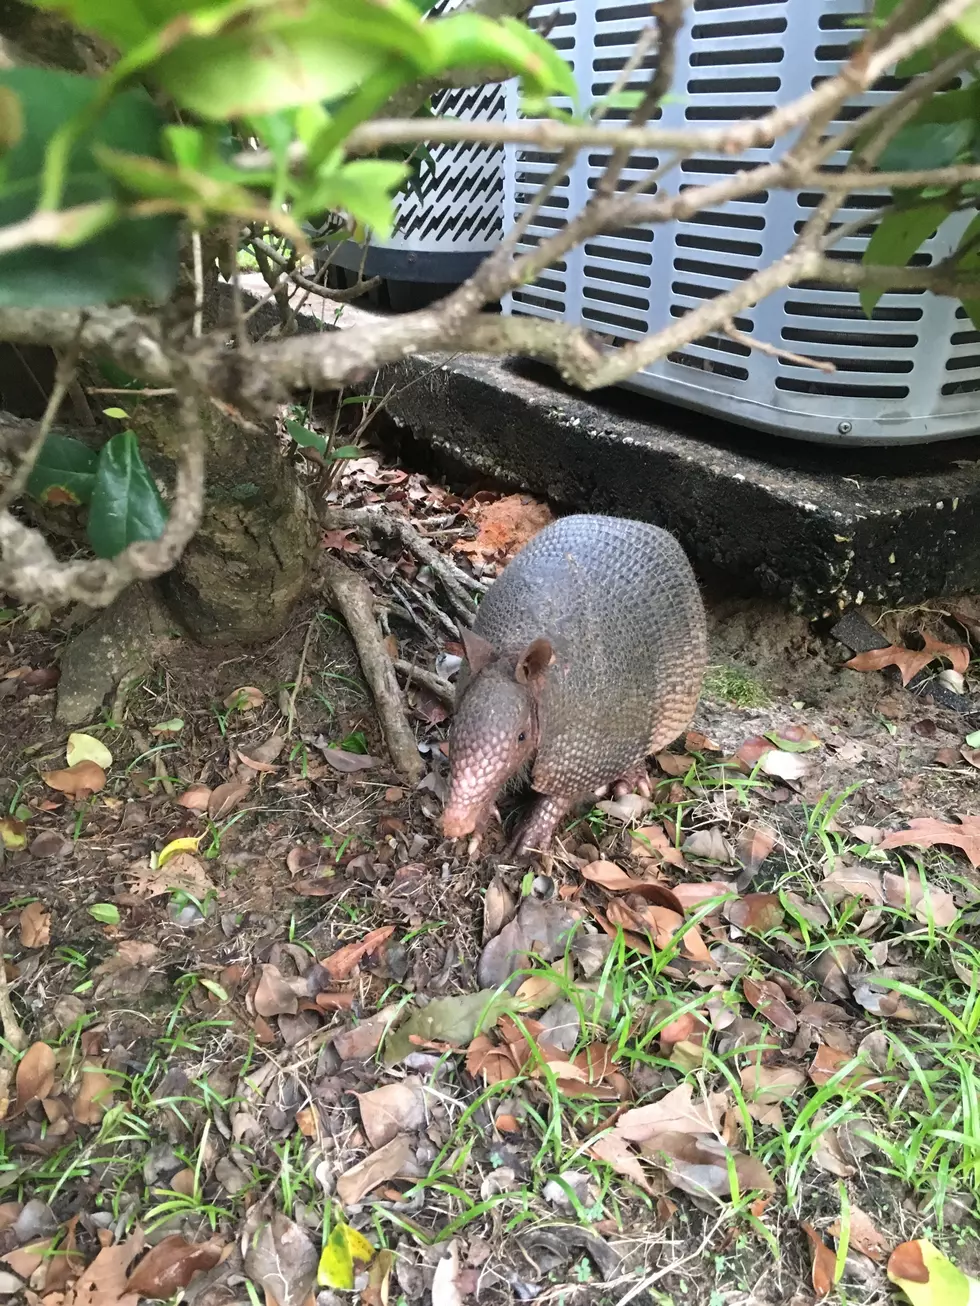 Mini-Mammal Spotted Outside Local Apartments – What’s He Up To?